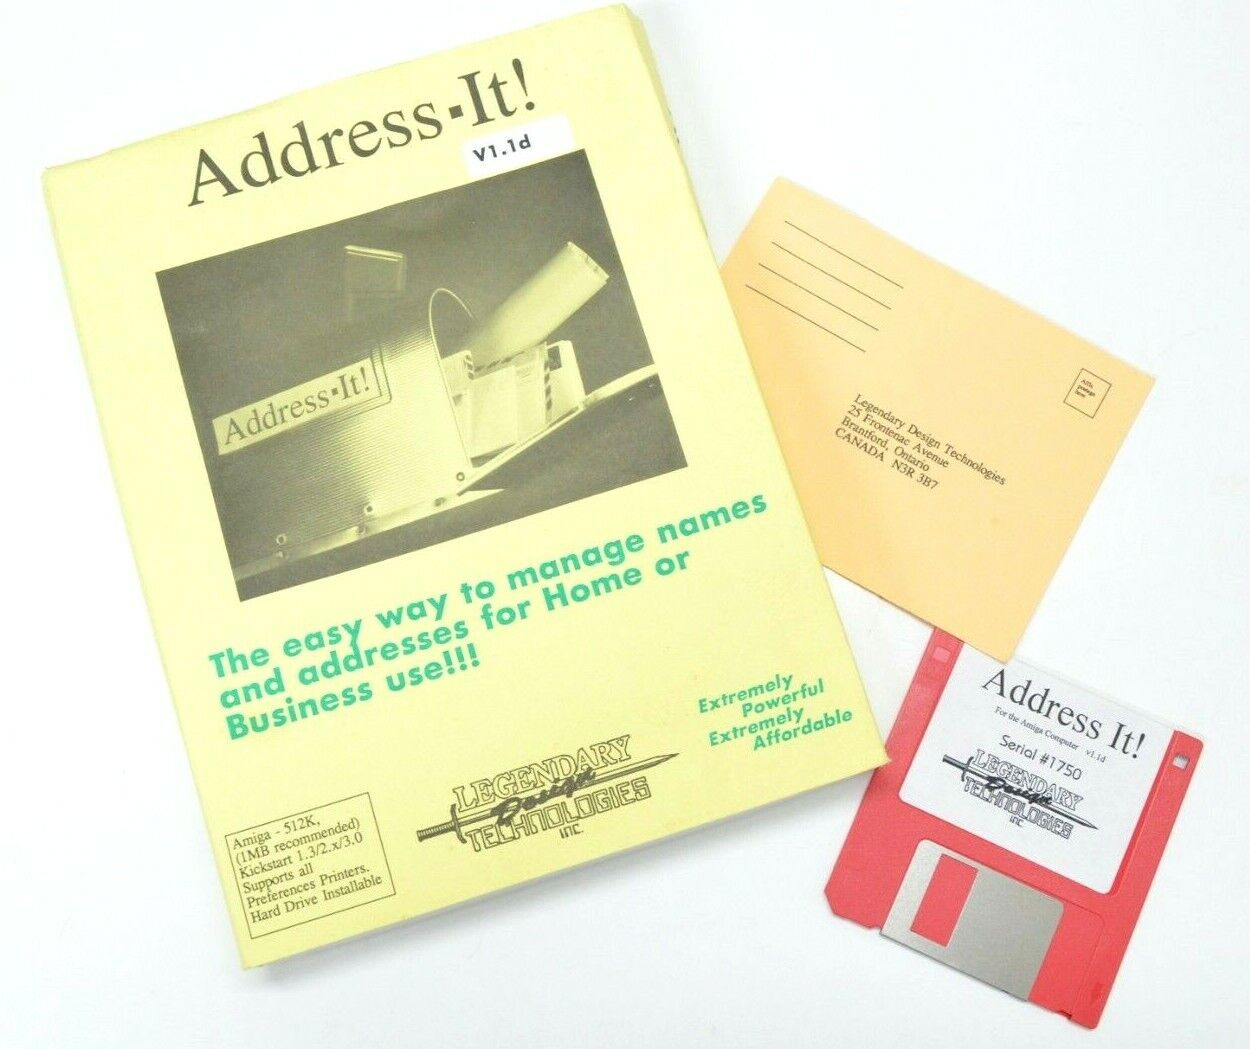 Commodore Amiga Address It Software V1.1d Disk Only Fair Condition Taped Cover 